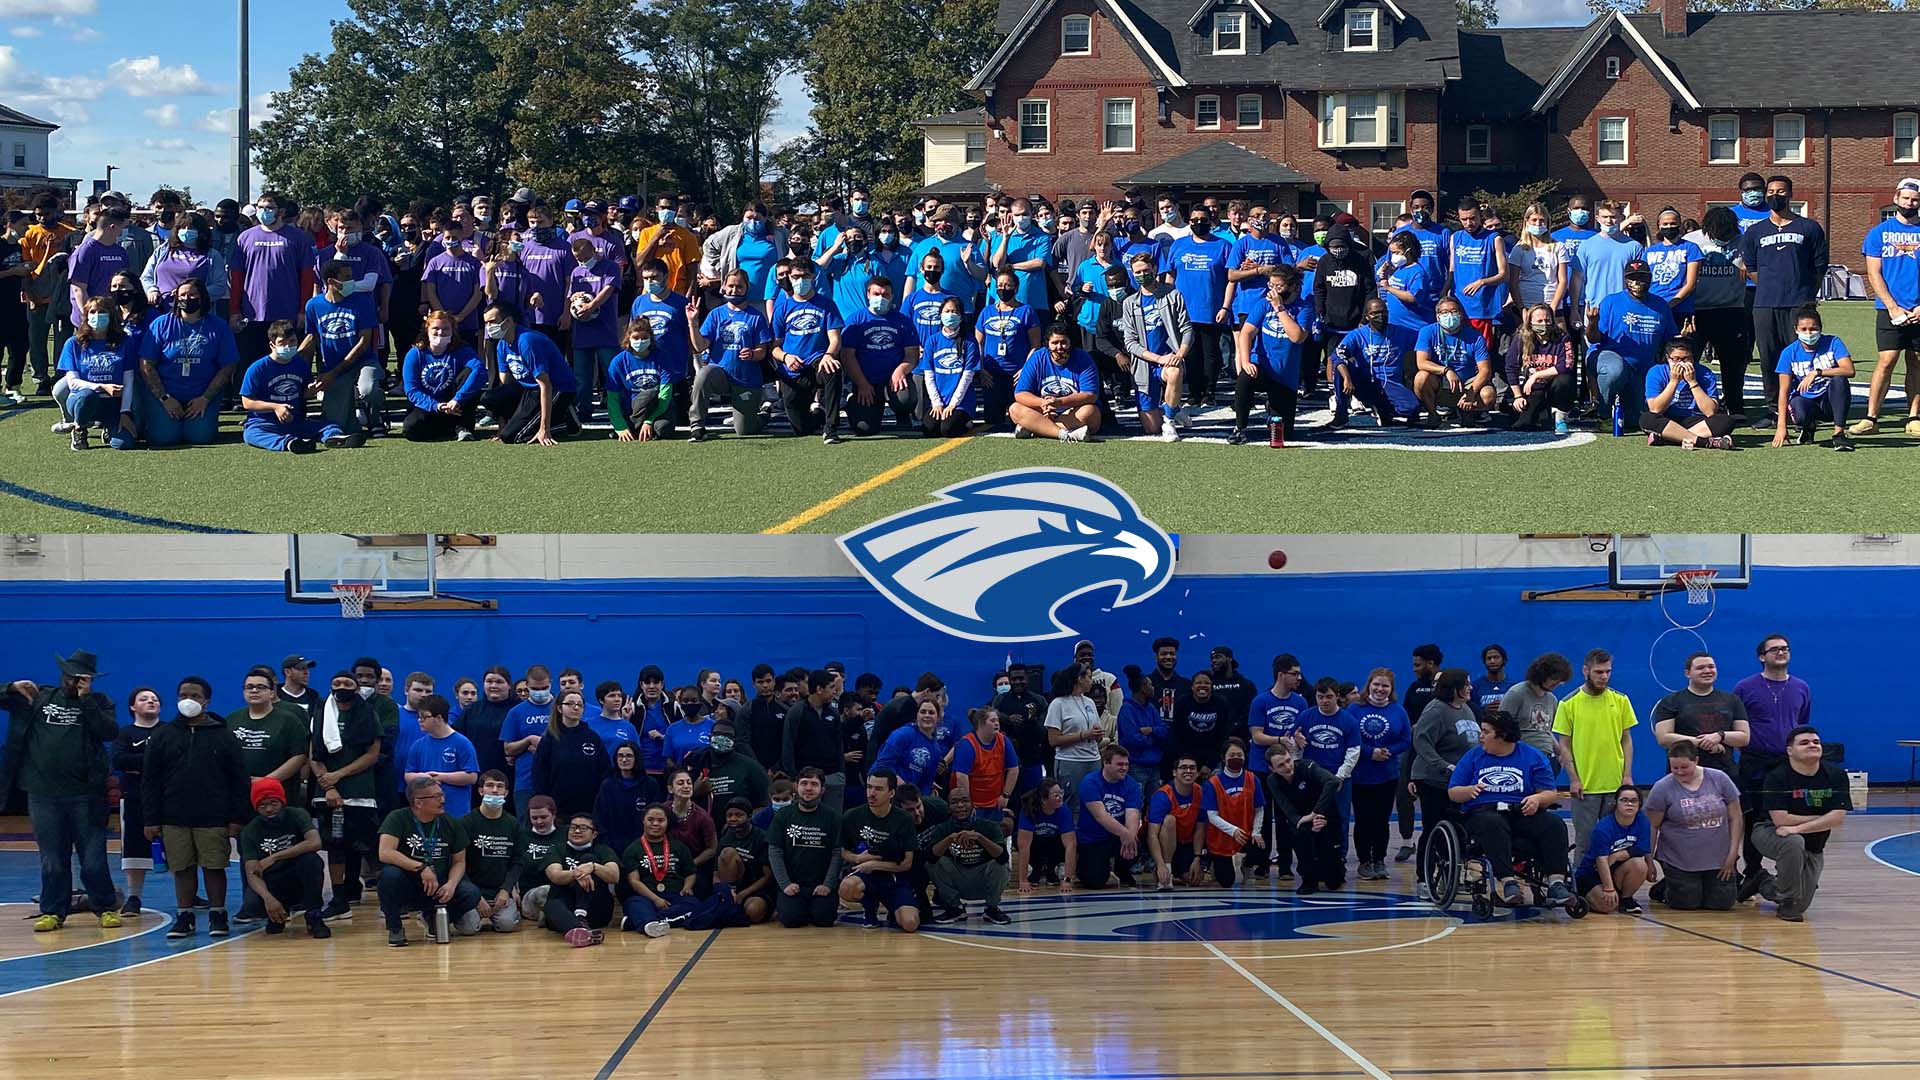 Albertus Magnus Athletics Department Gives Back to the Community, Exceeds Service Hours Goal for Ninth Straight Year